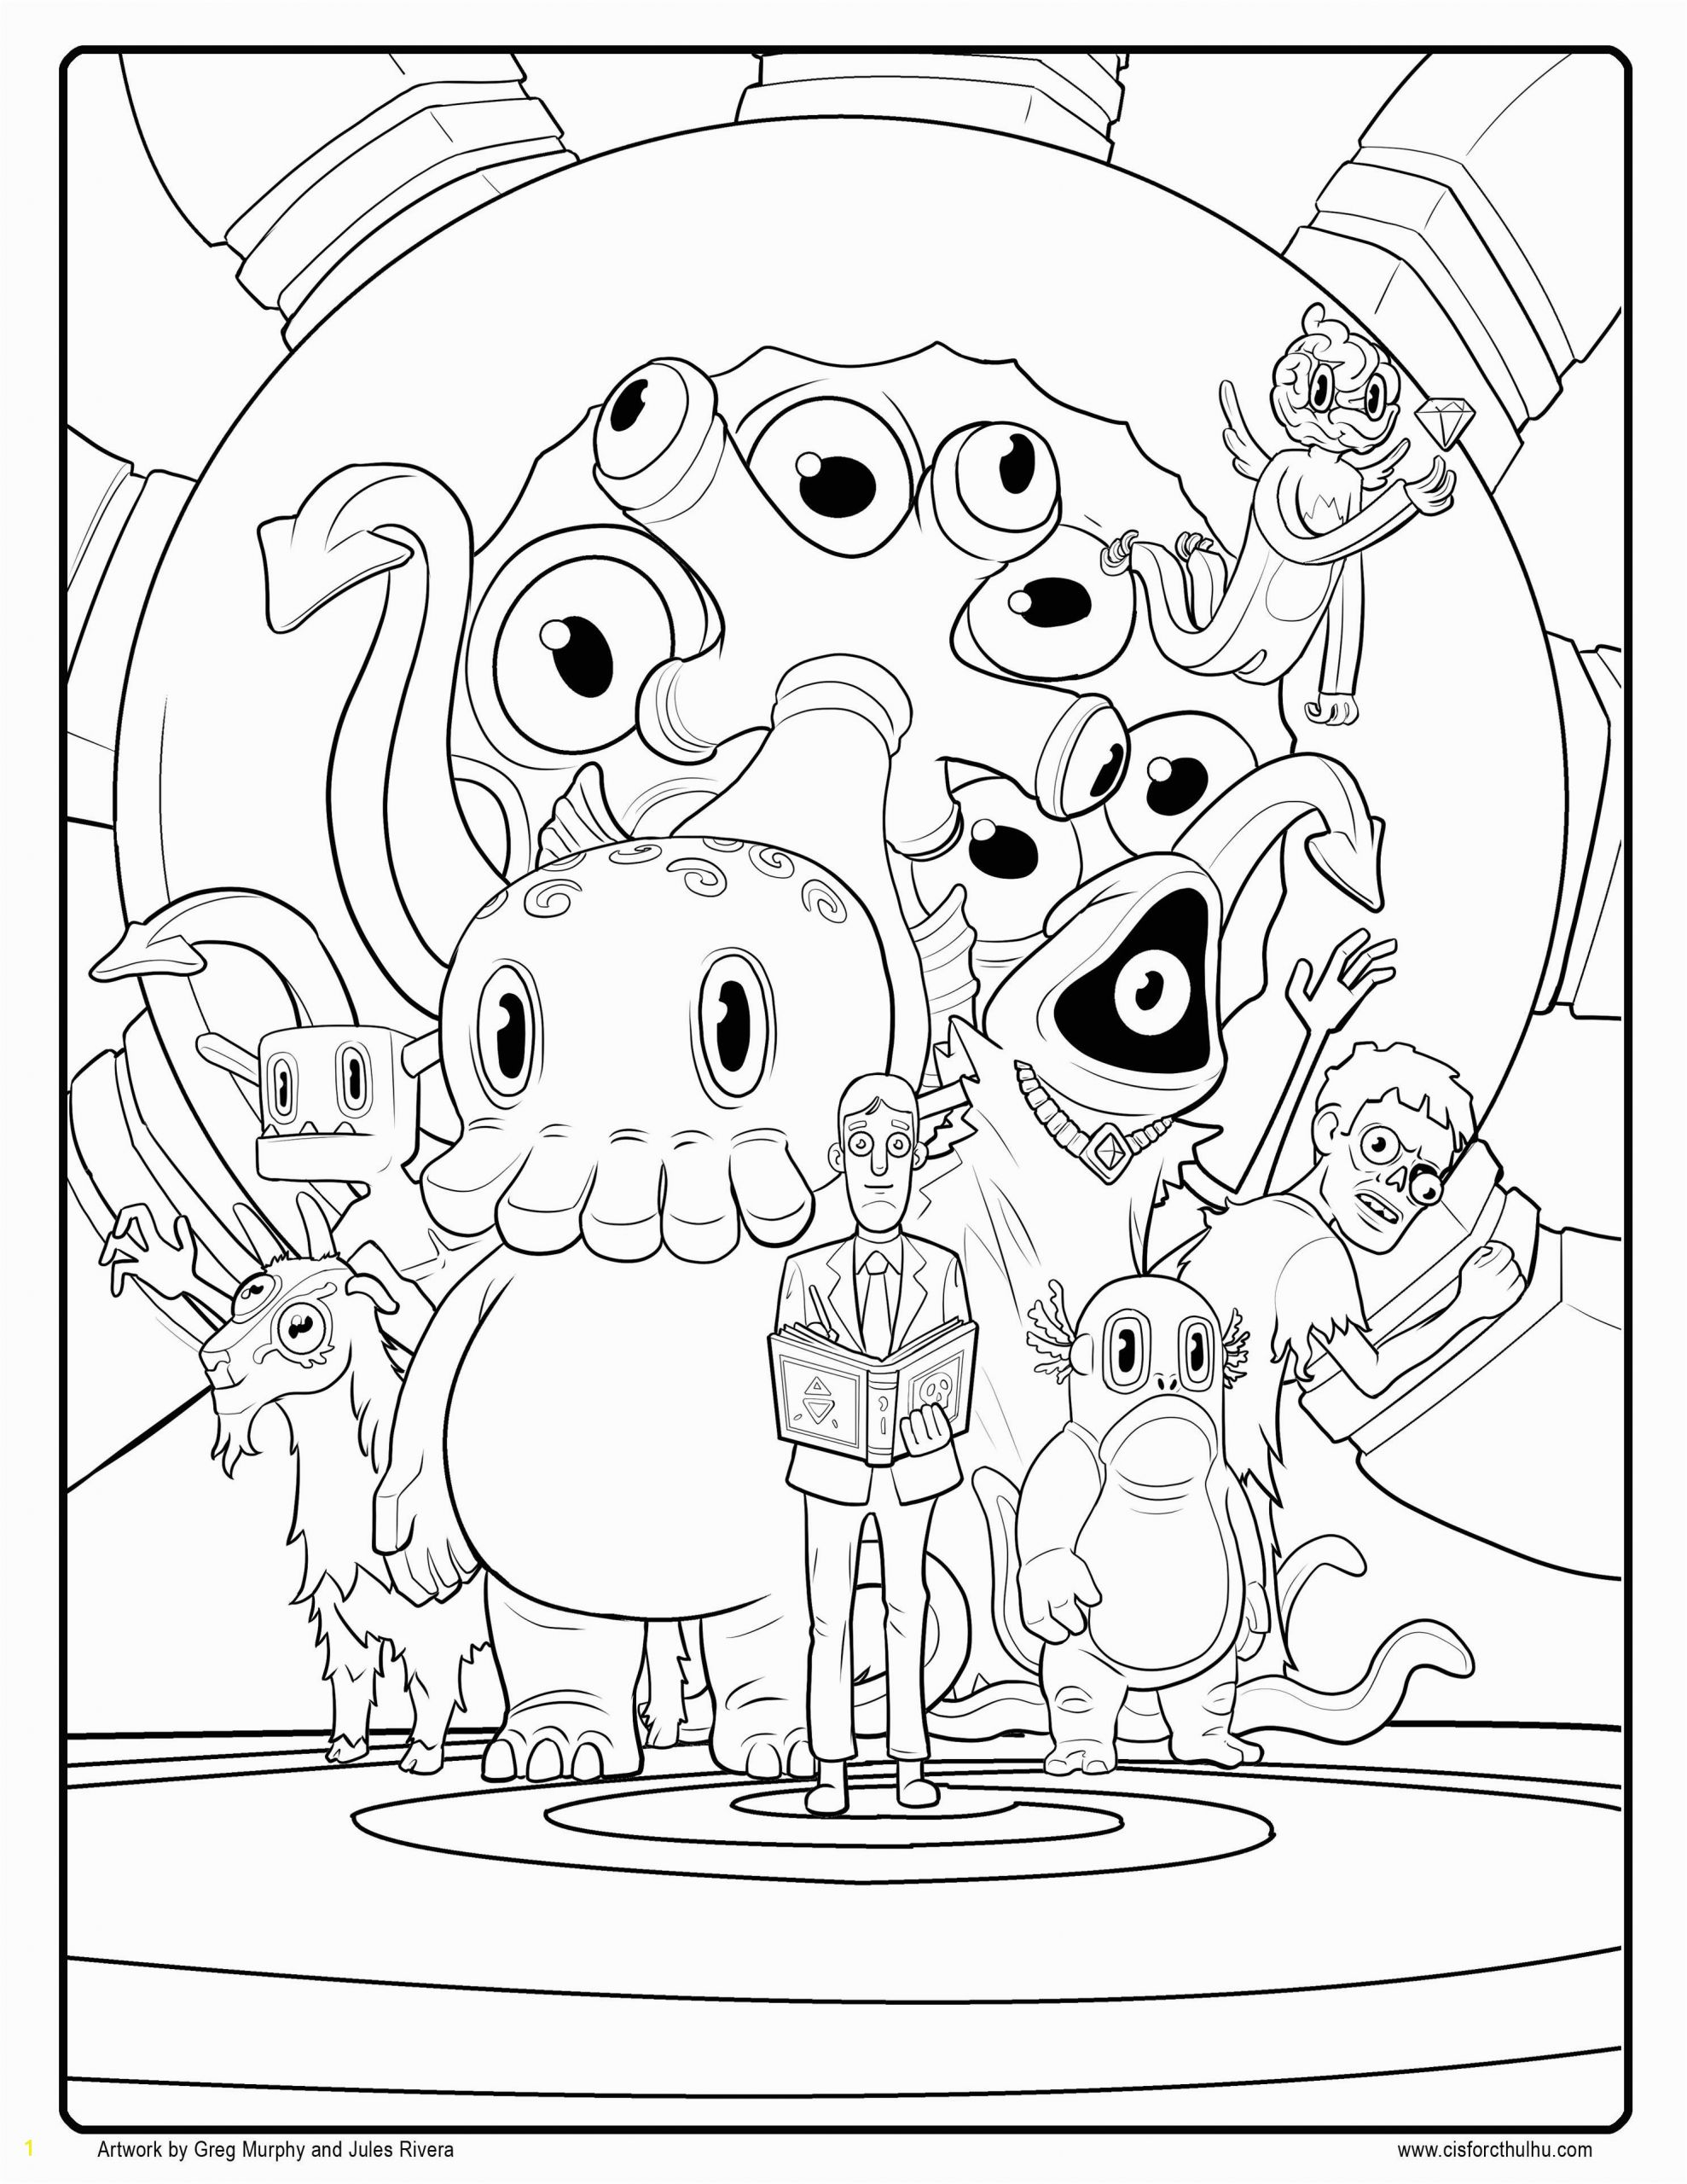 Coloring Page Of Flamingo Free C is for Cthulhu Coloring Sheet